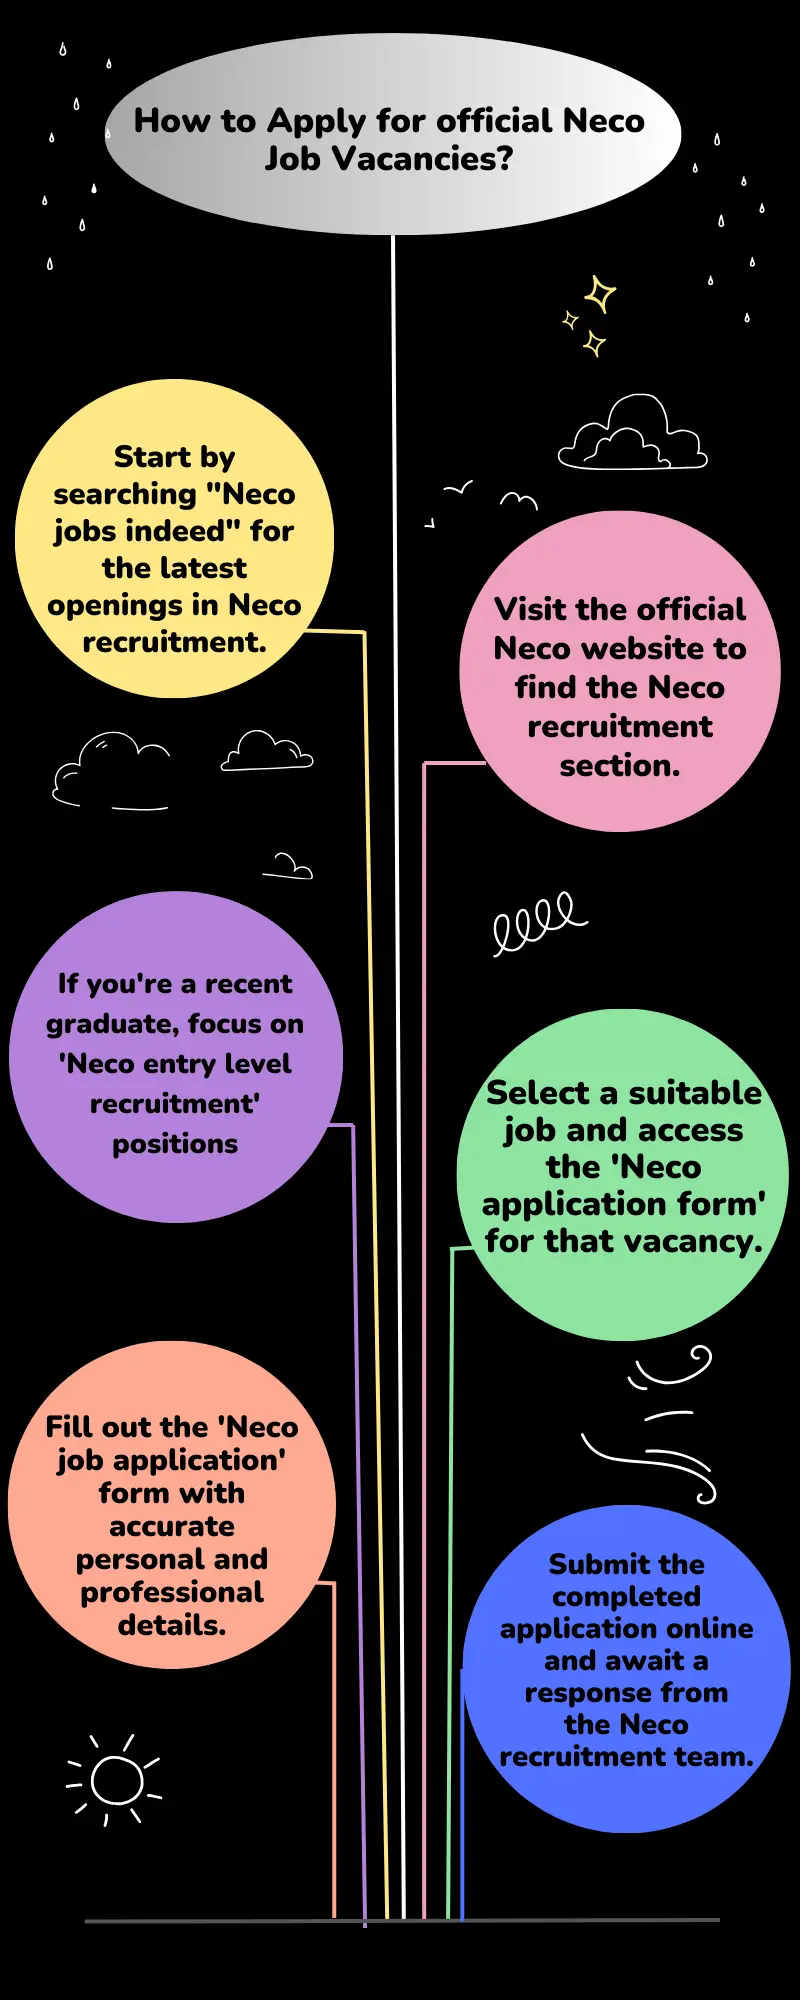 How to Apply for official Neco Job Vacancies?